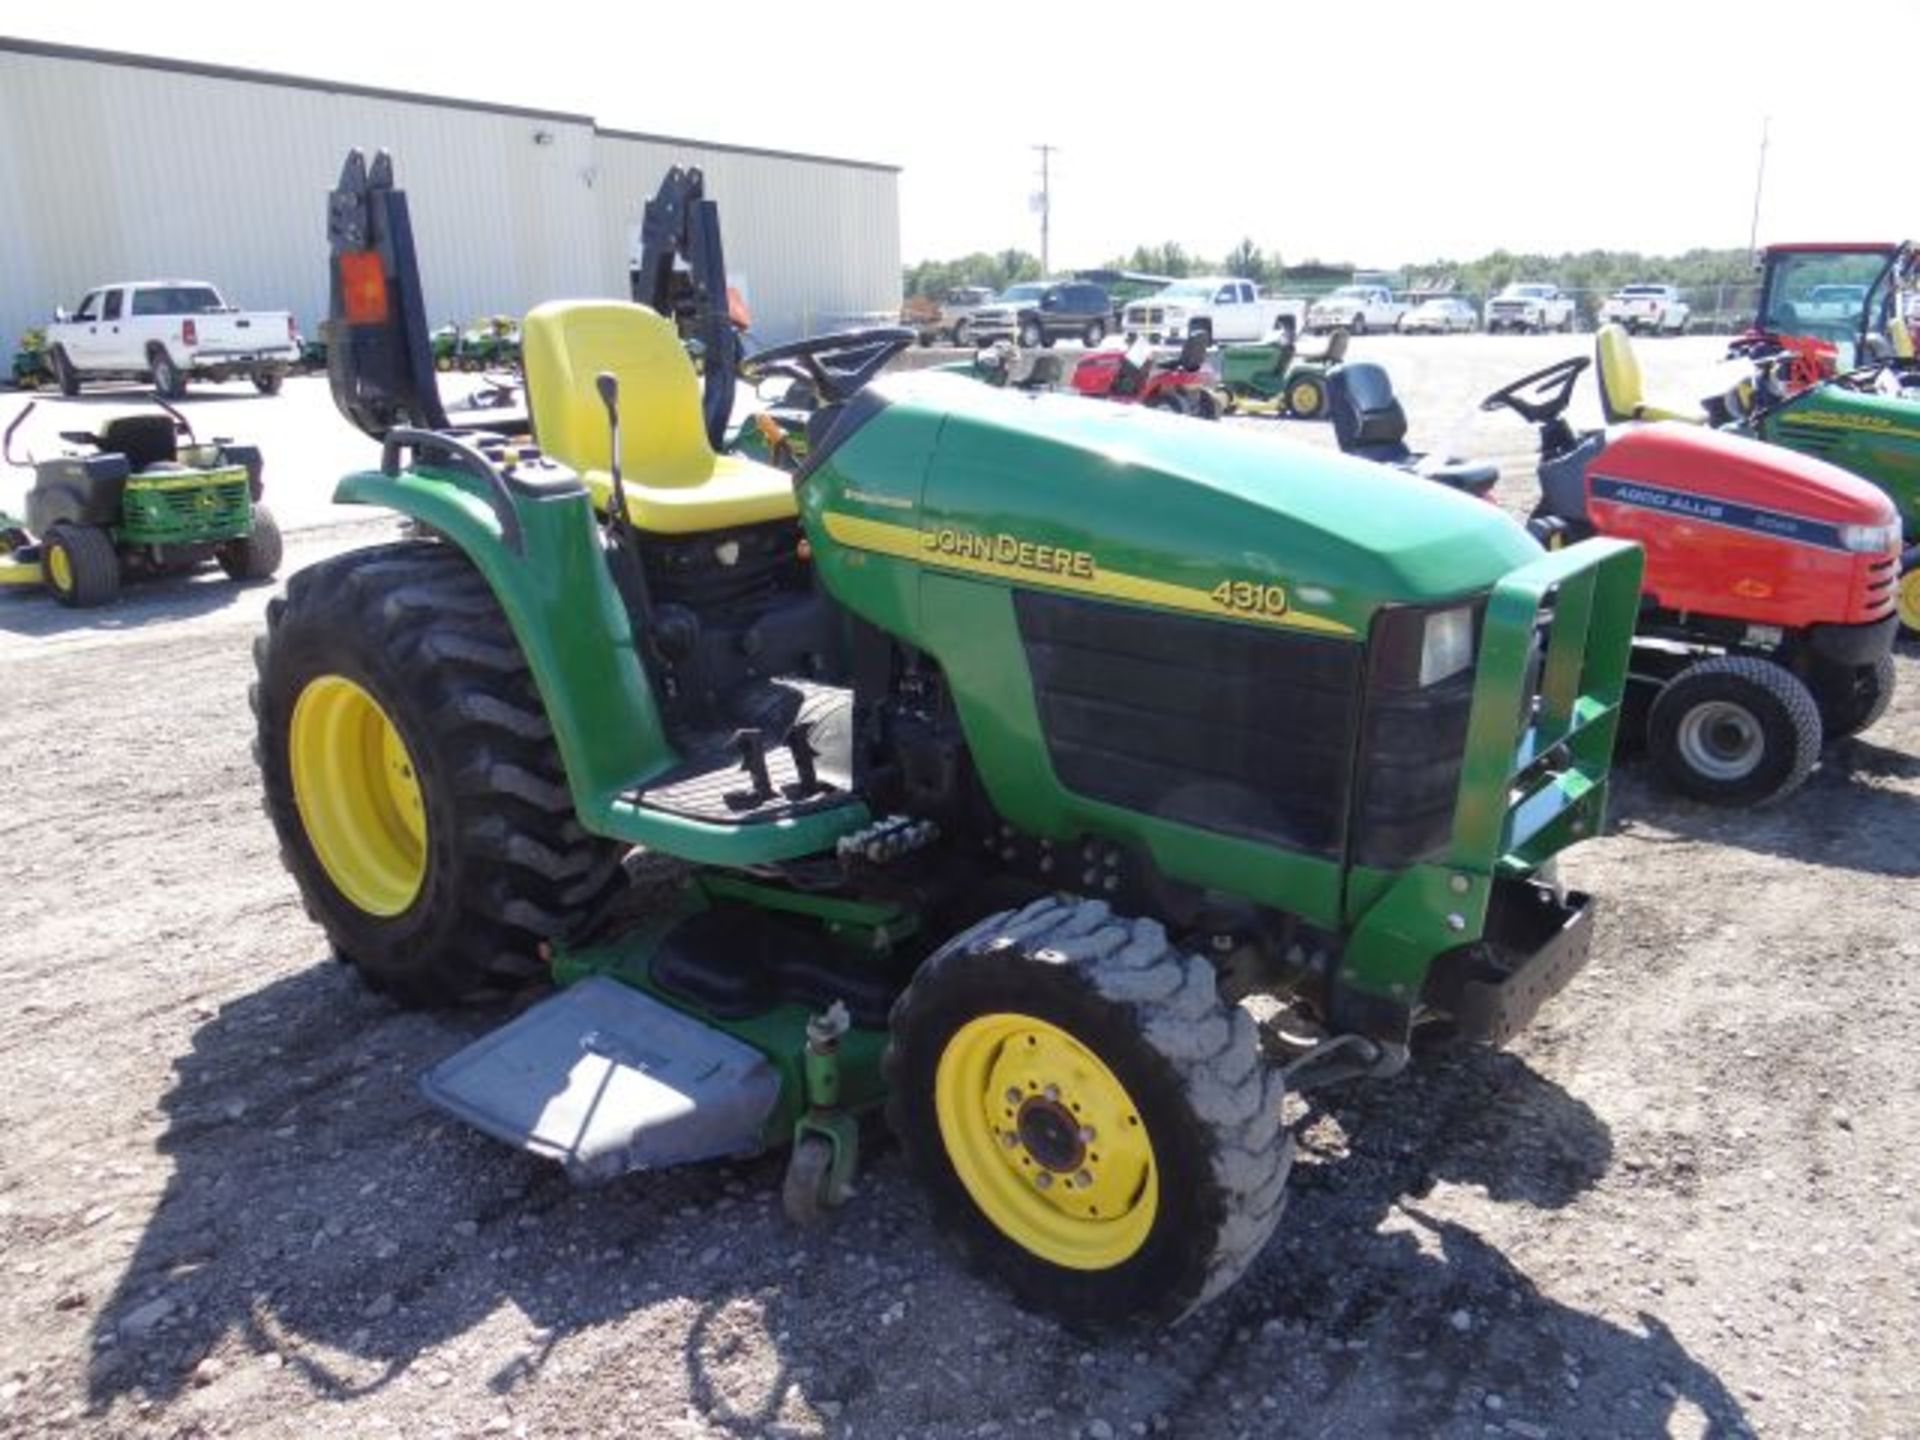 Lot 30476 - 2002 JD 4310 Compact Tractor 3500 hrs, 32hp, Diesel, MFWD, 3sp Hydro, Folding ROPS, - Image 3 of 5